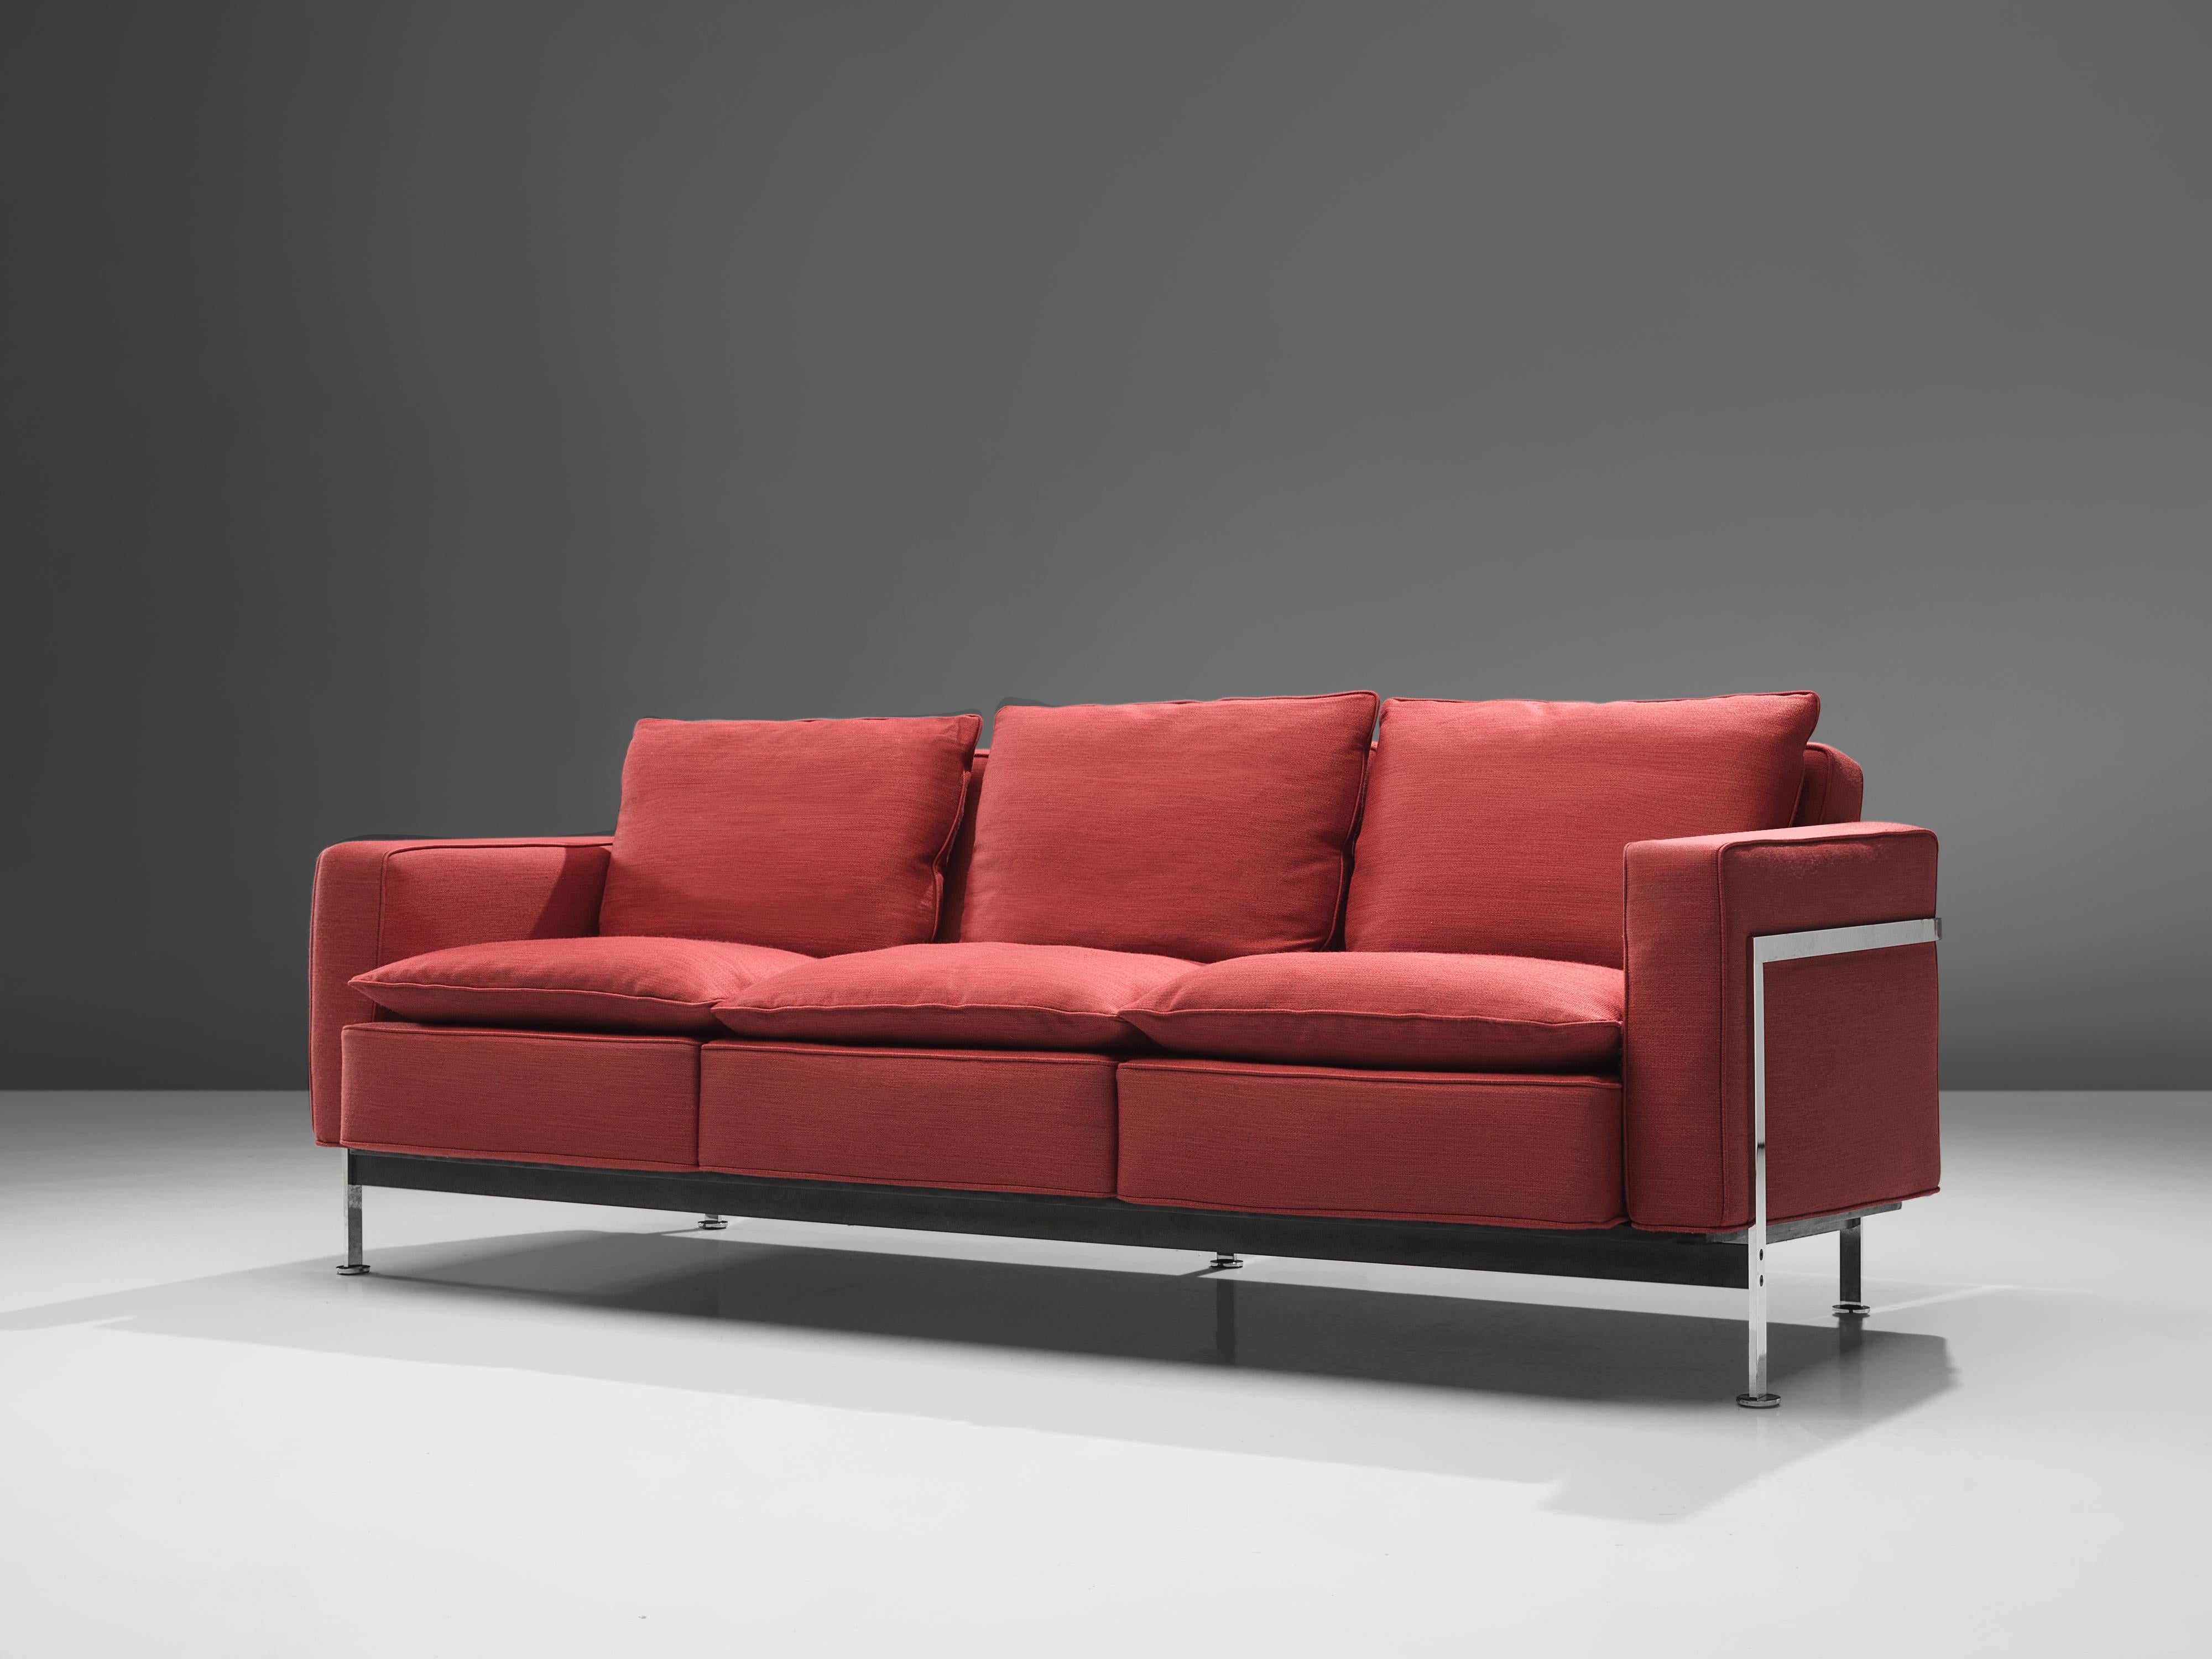 Robert Haussmann for De Sede, sofa model RH-302, metal, red upholstery, Switzerland, design 1954

This comfortable sofa is designed by Robert Haussmann for De Sede and features a chromed frame that functions as a basket for the cushions. The thick